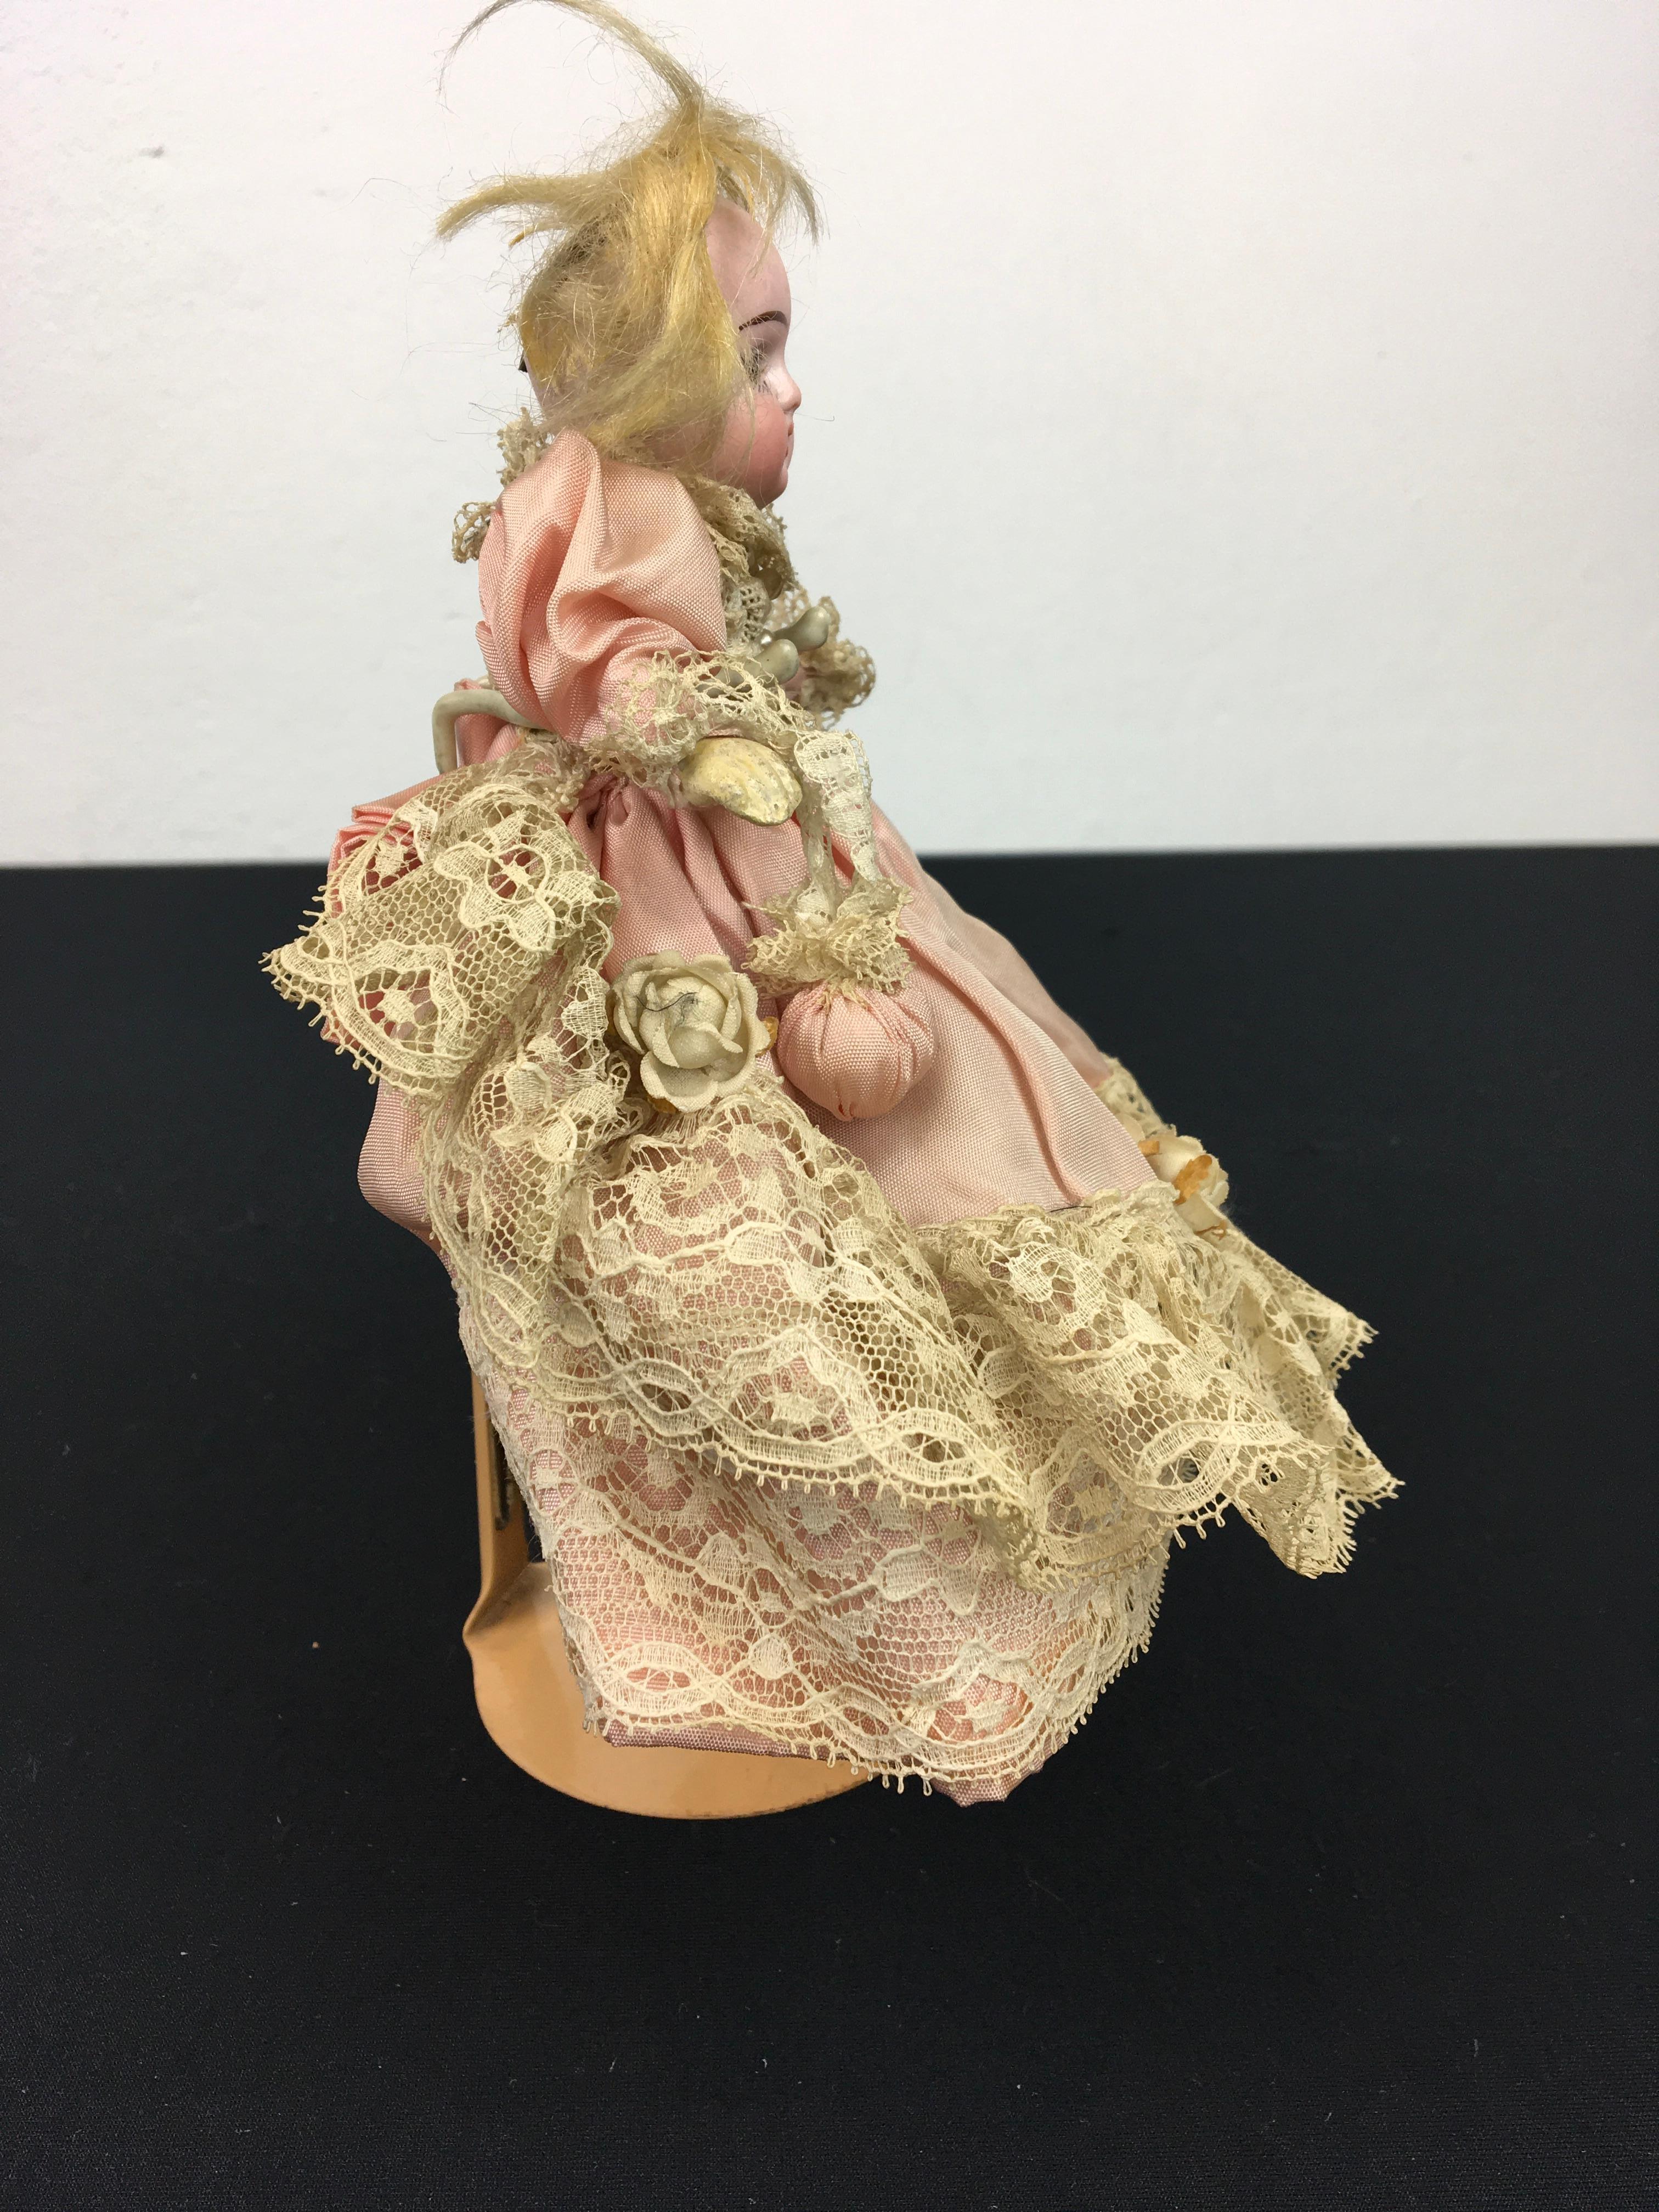 Porcelain Antique Little Doll Bisque Head, Glass Eyes and Composition, Numbered 1770